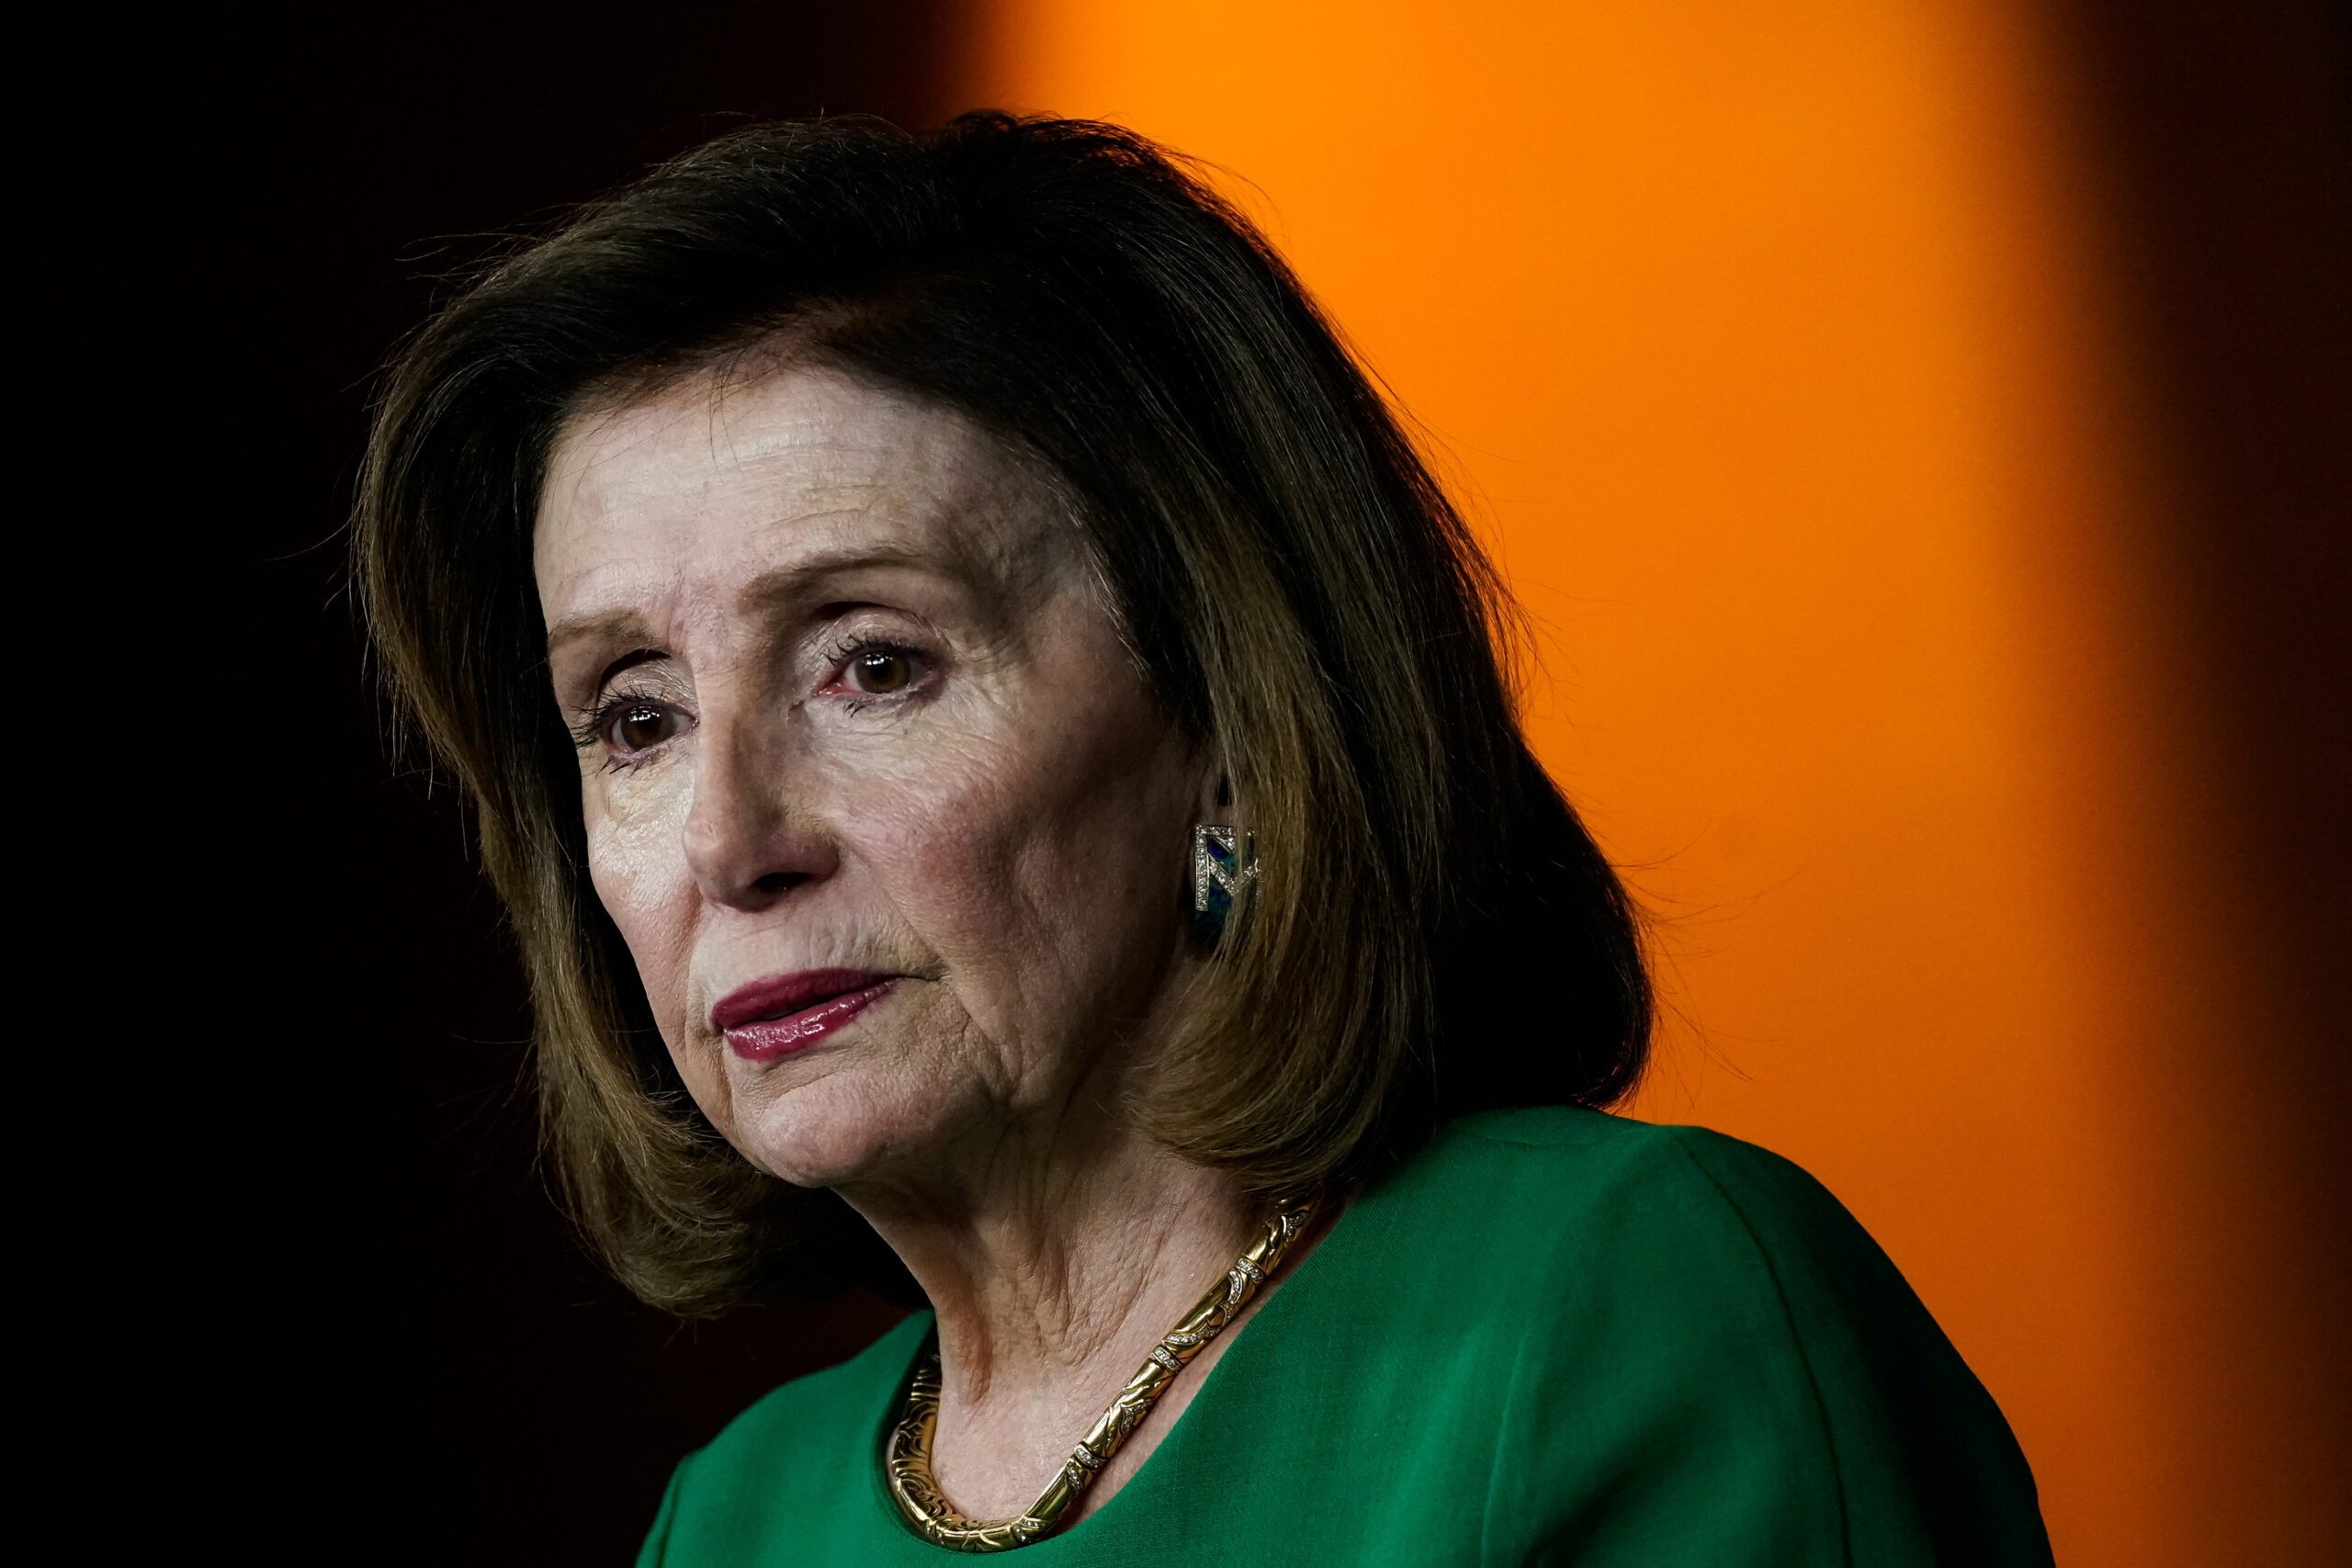 US House Speaker Pelosi barred from Catholic communion over abortion stance